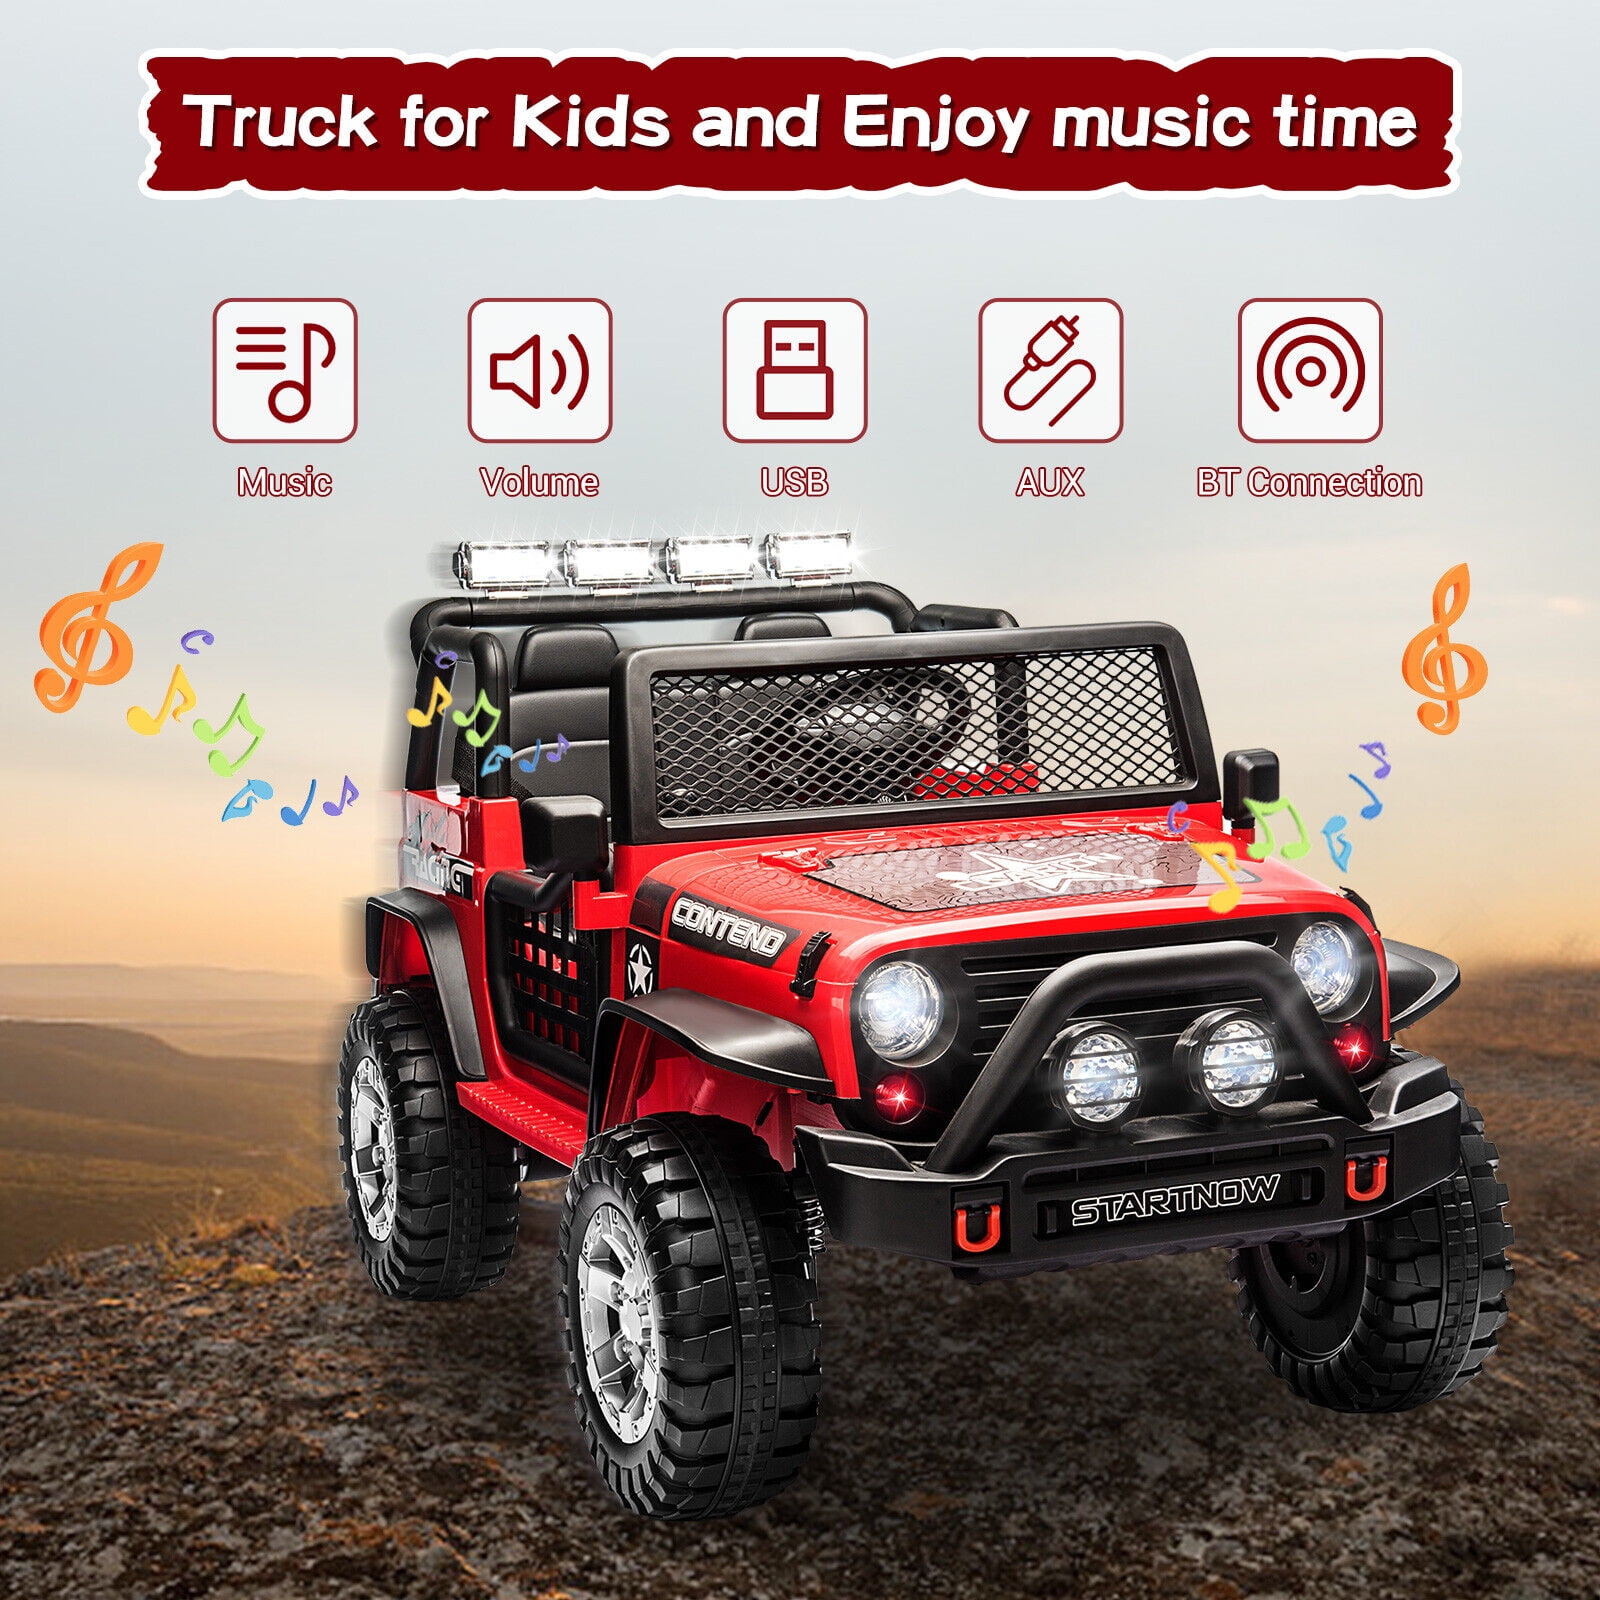 Dazone 12V Kids Ride on Jeep Car, Electric 2 Seats Off-road Jeep Ride on Truck Vehicle with Remote Control, LED Lights, MP3 Music, Red - image 1 of 7